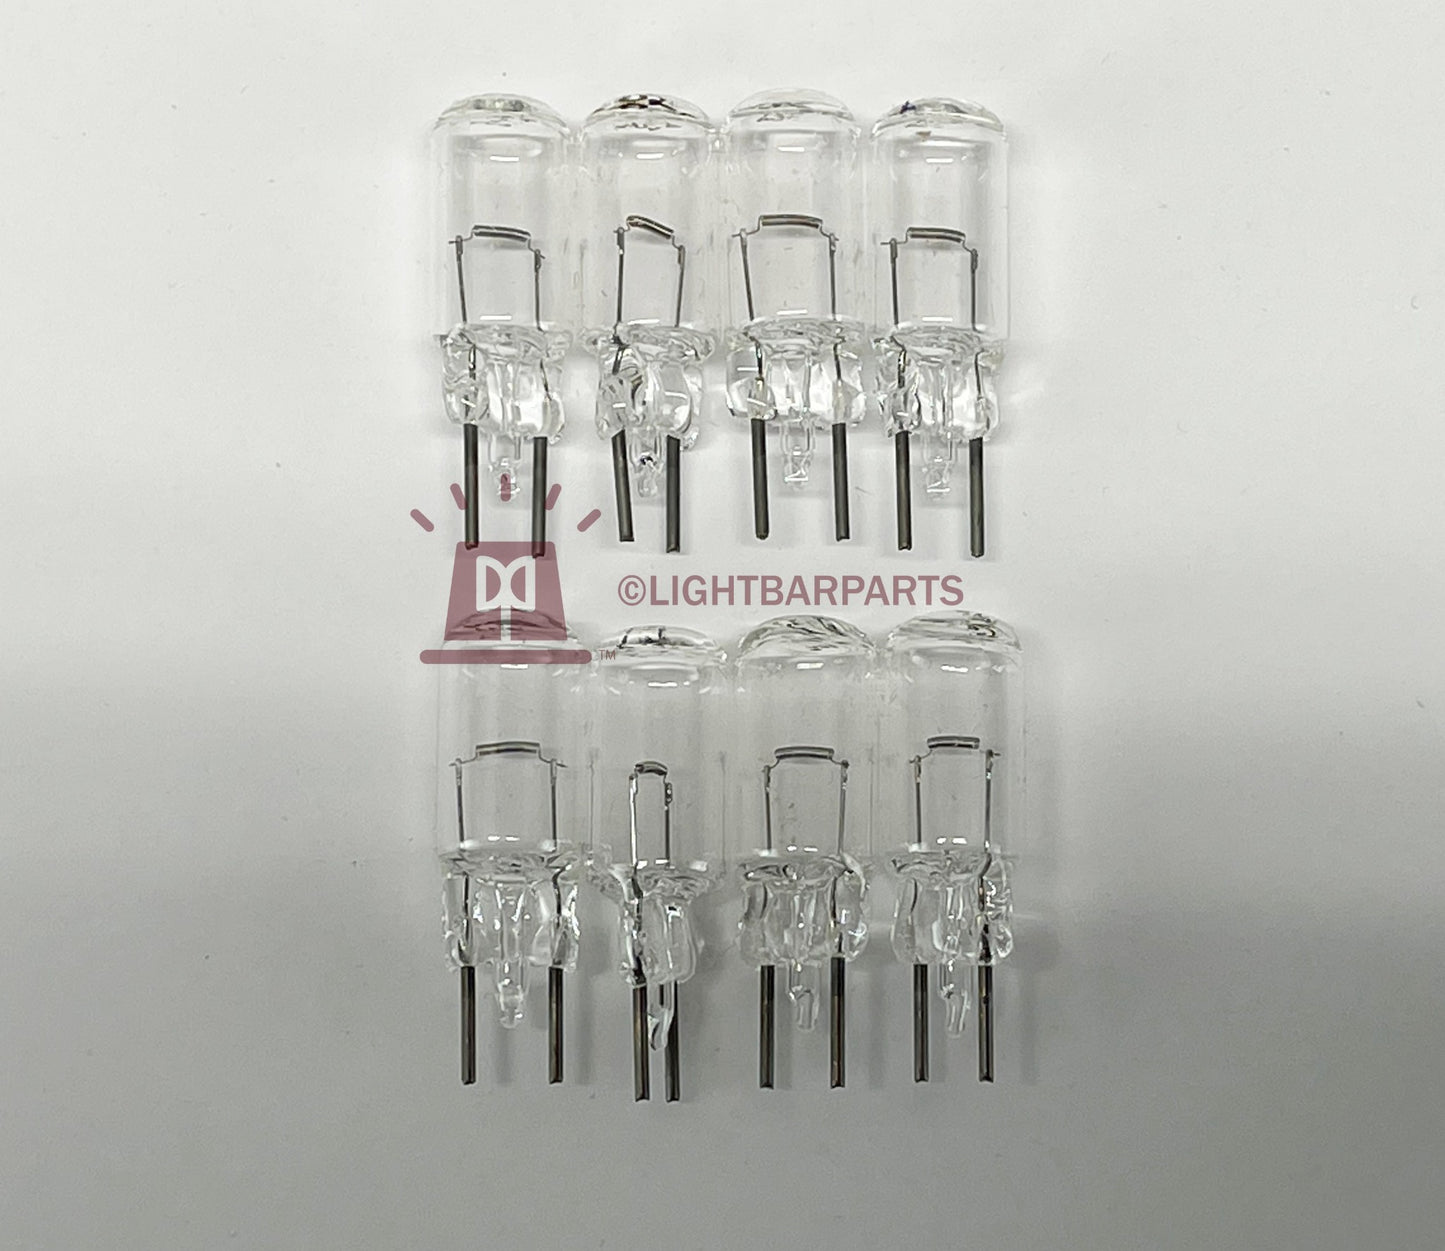 Federal Signal SignalMaster Signal Master - Replacement Bulbs Set Of 8 - 12V/27W - NEW